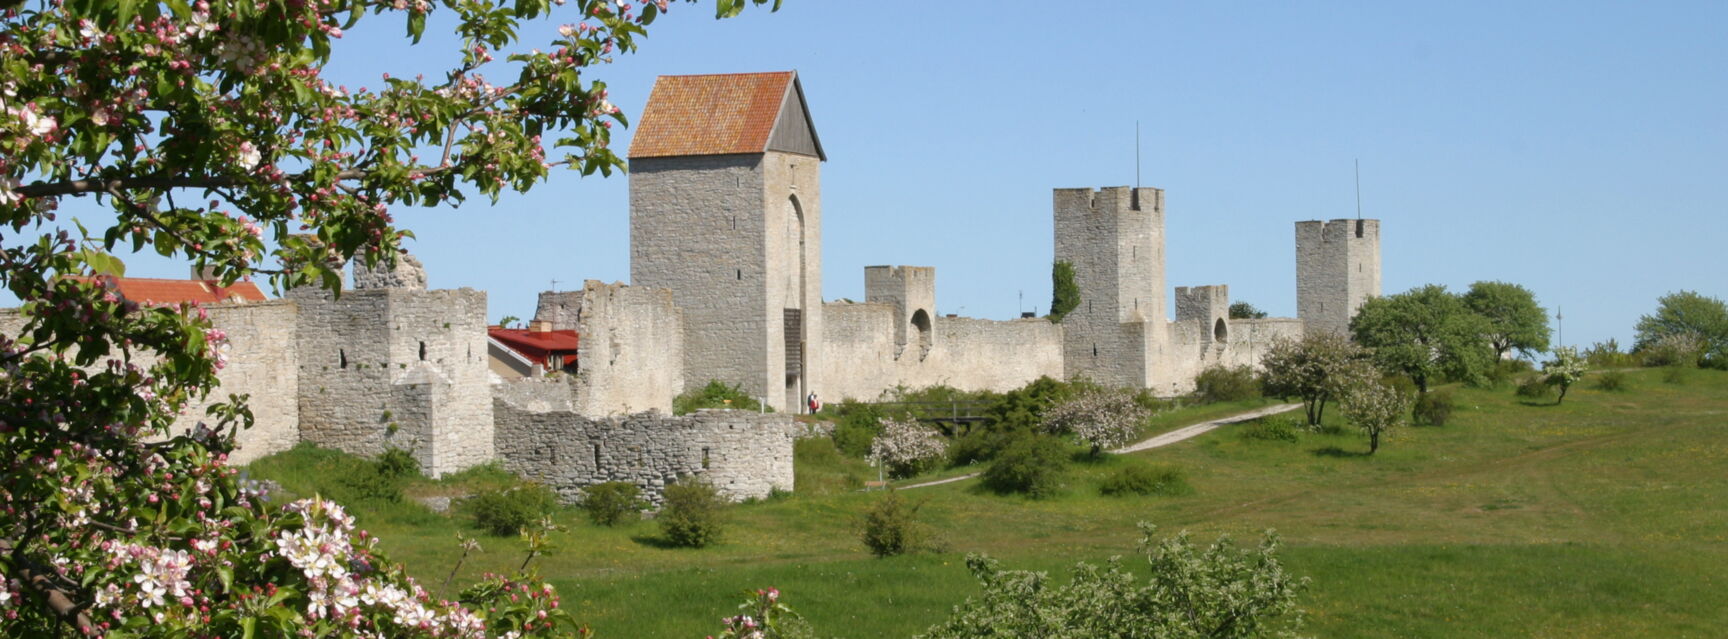 Visby town wall